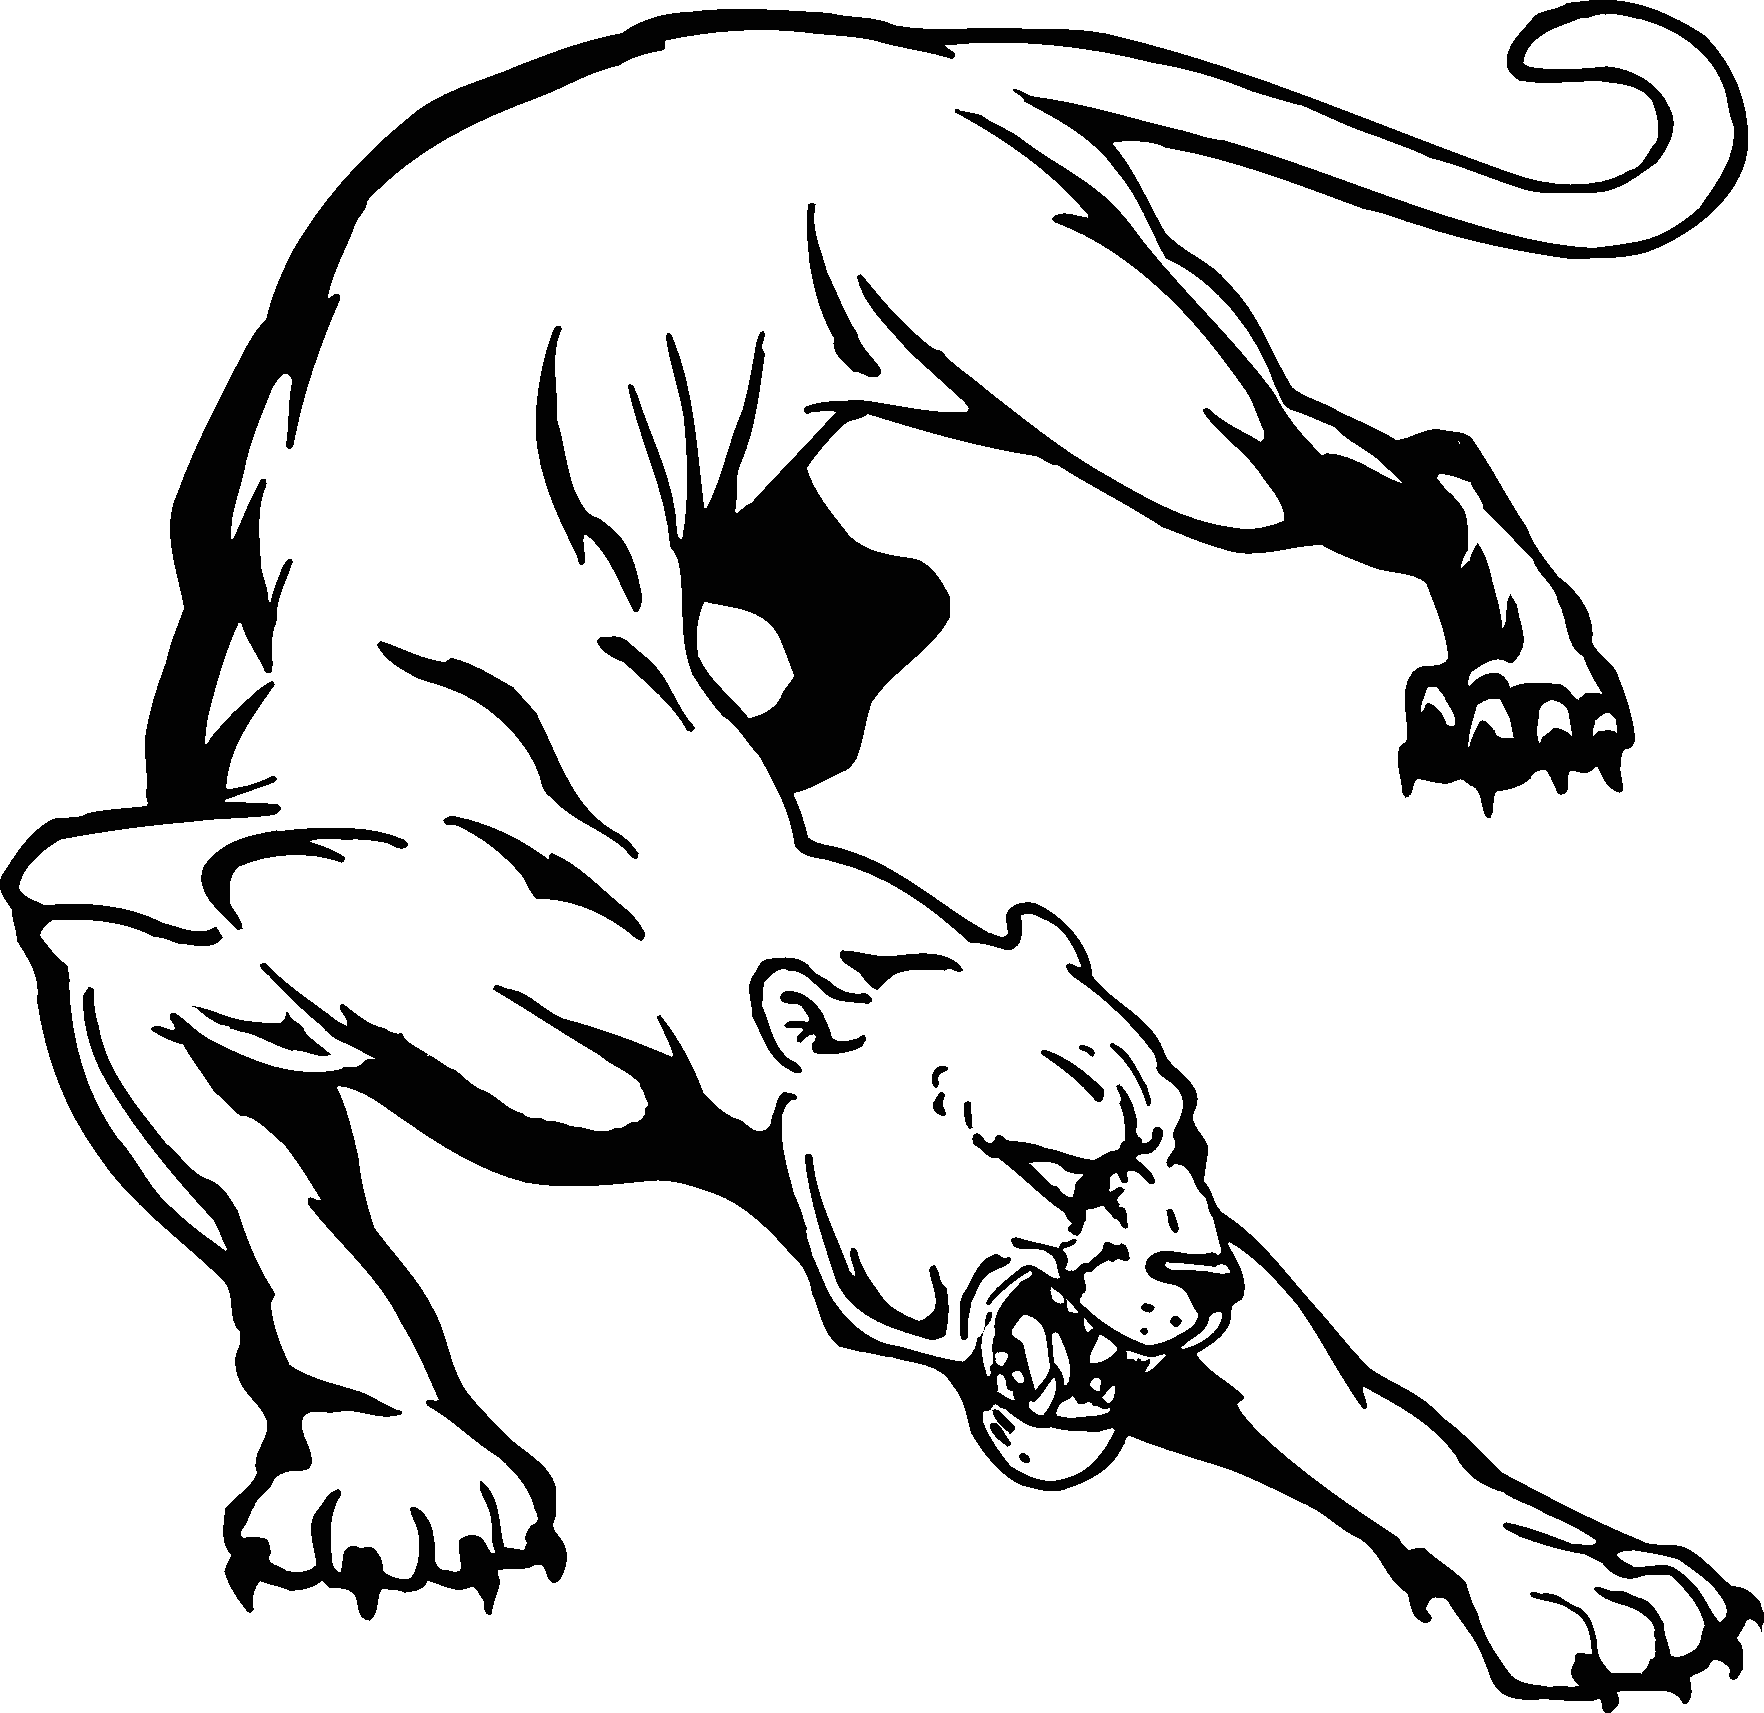 panther clipart free vector - photo #13